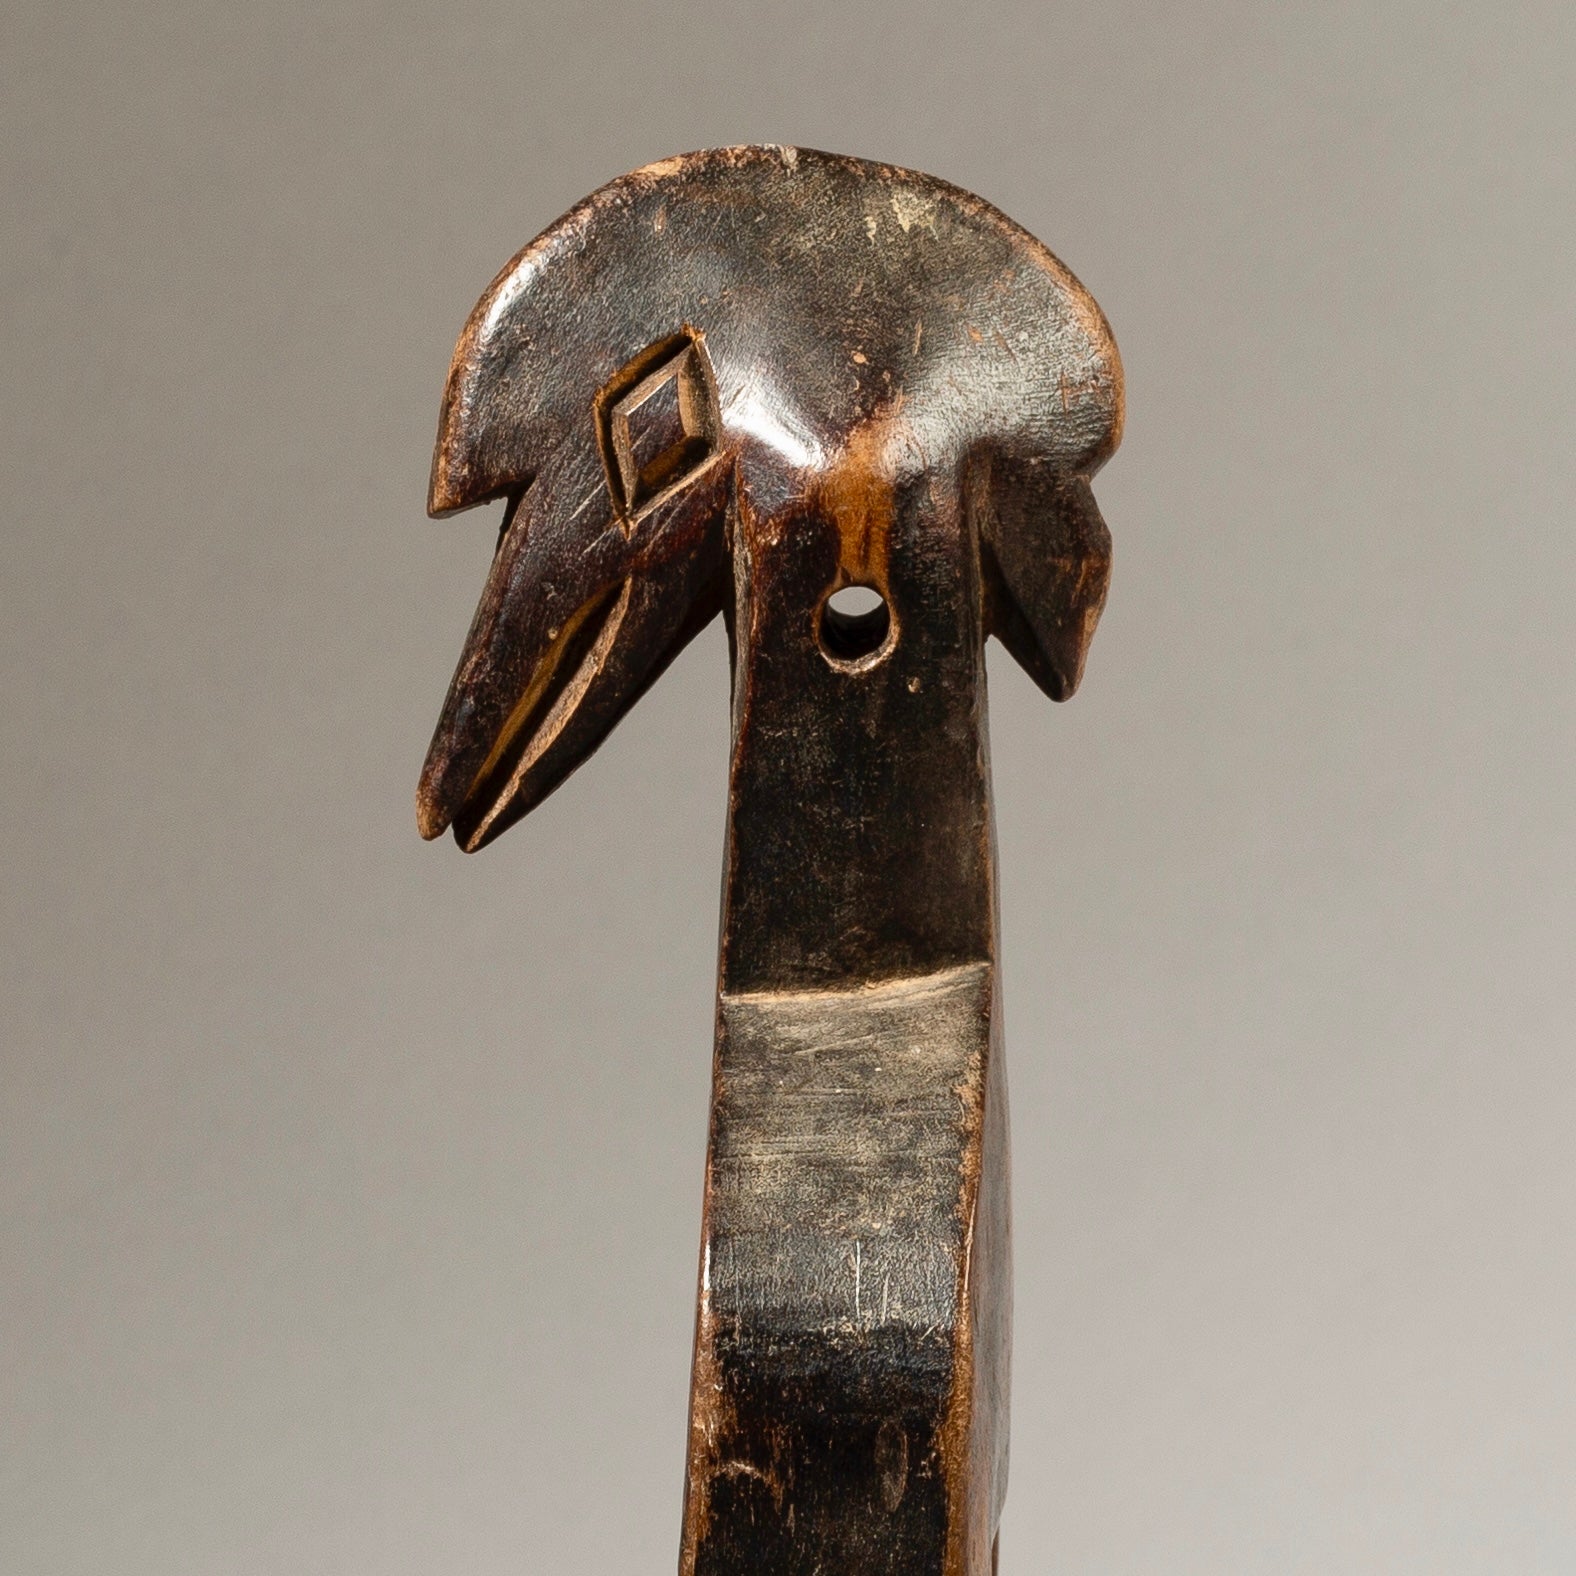 A PRETTY SENUFO HEDDLE PULLEY EX UK COLLECTION, FROM IVORY COAST W. AFRICA ( No 4599)